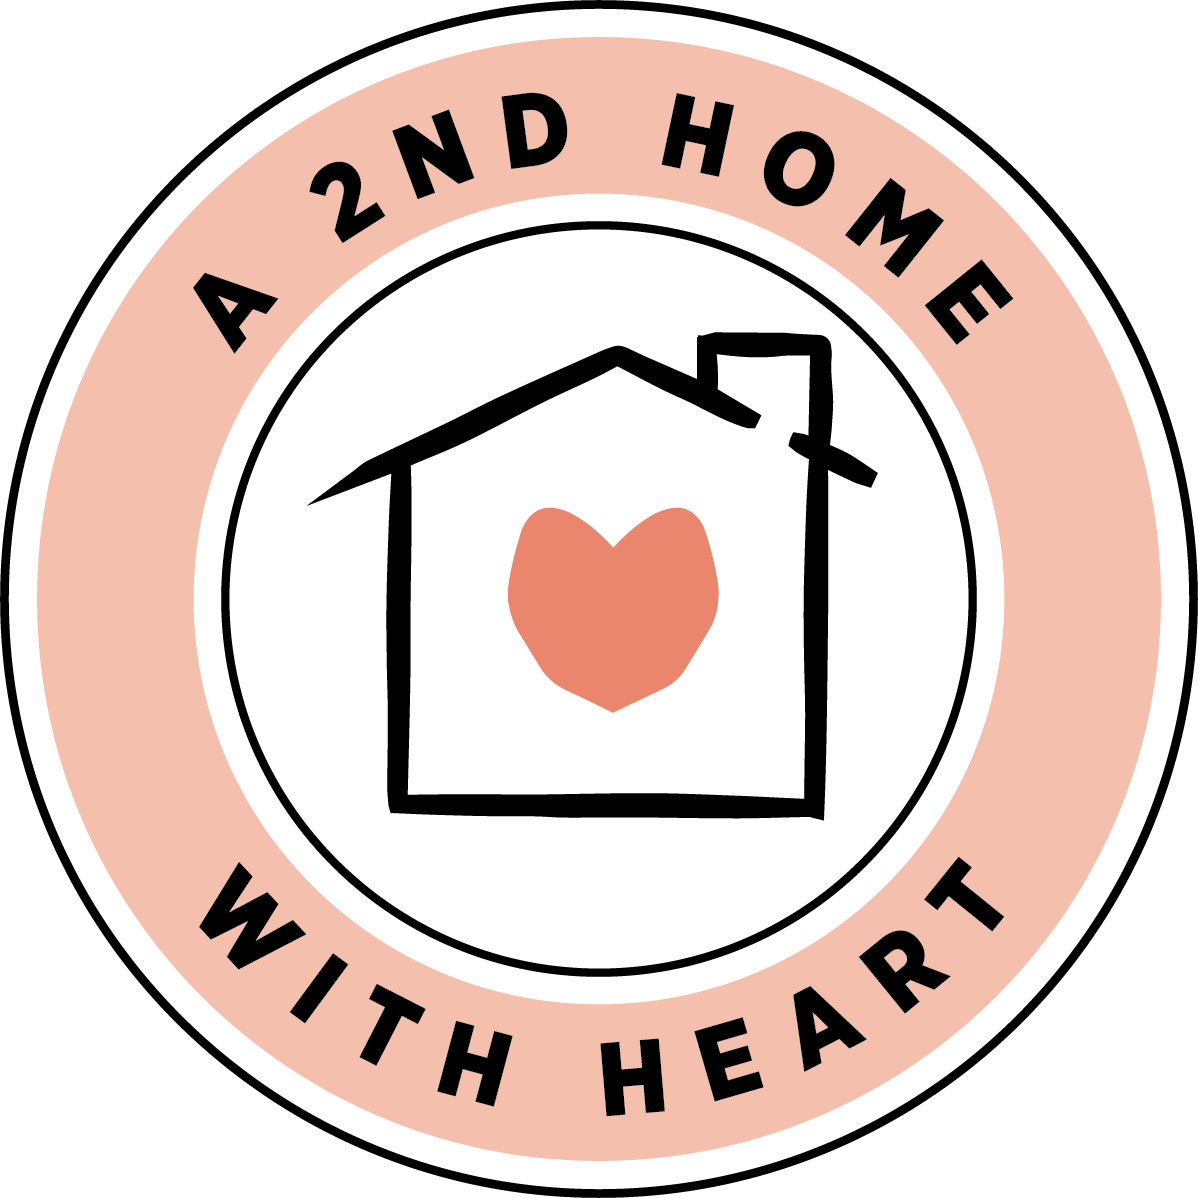 casa franchise sticker reading "a second home with heart" which is also a slogan used by our human resources specialist